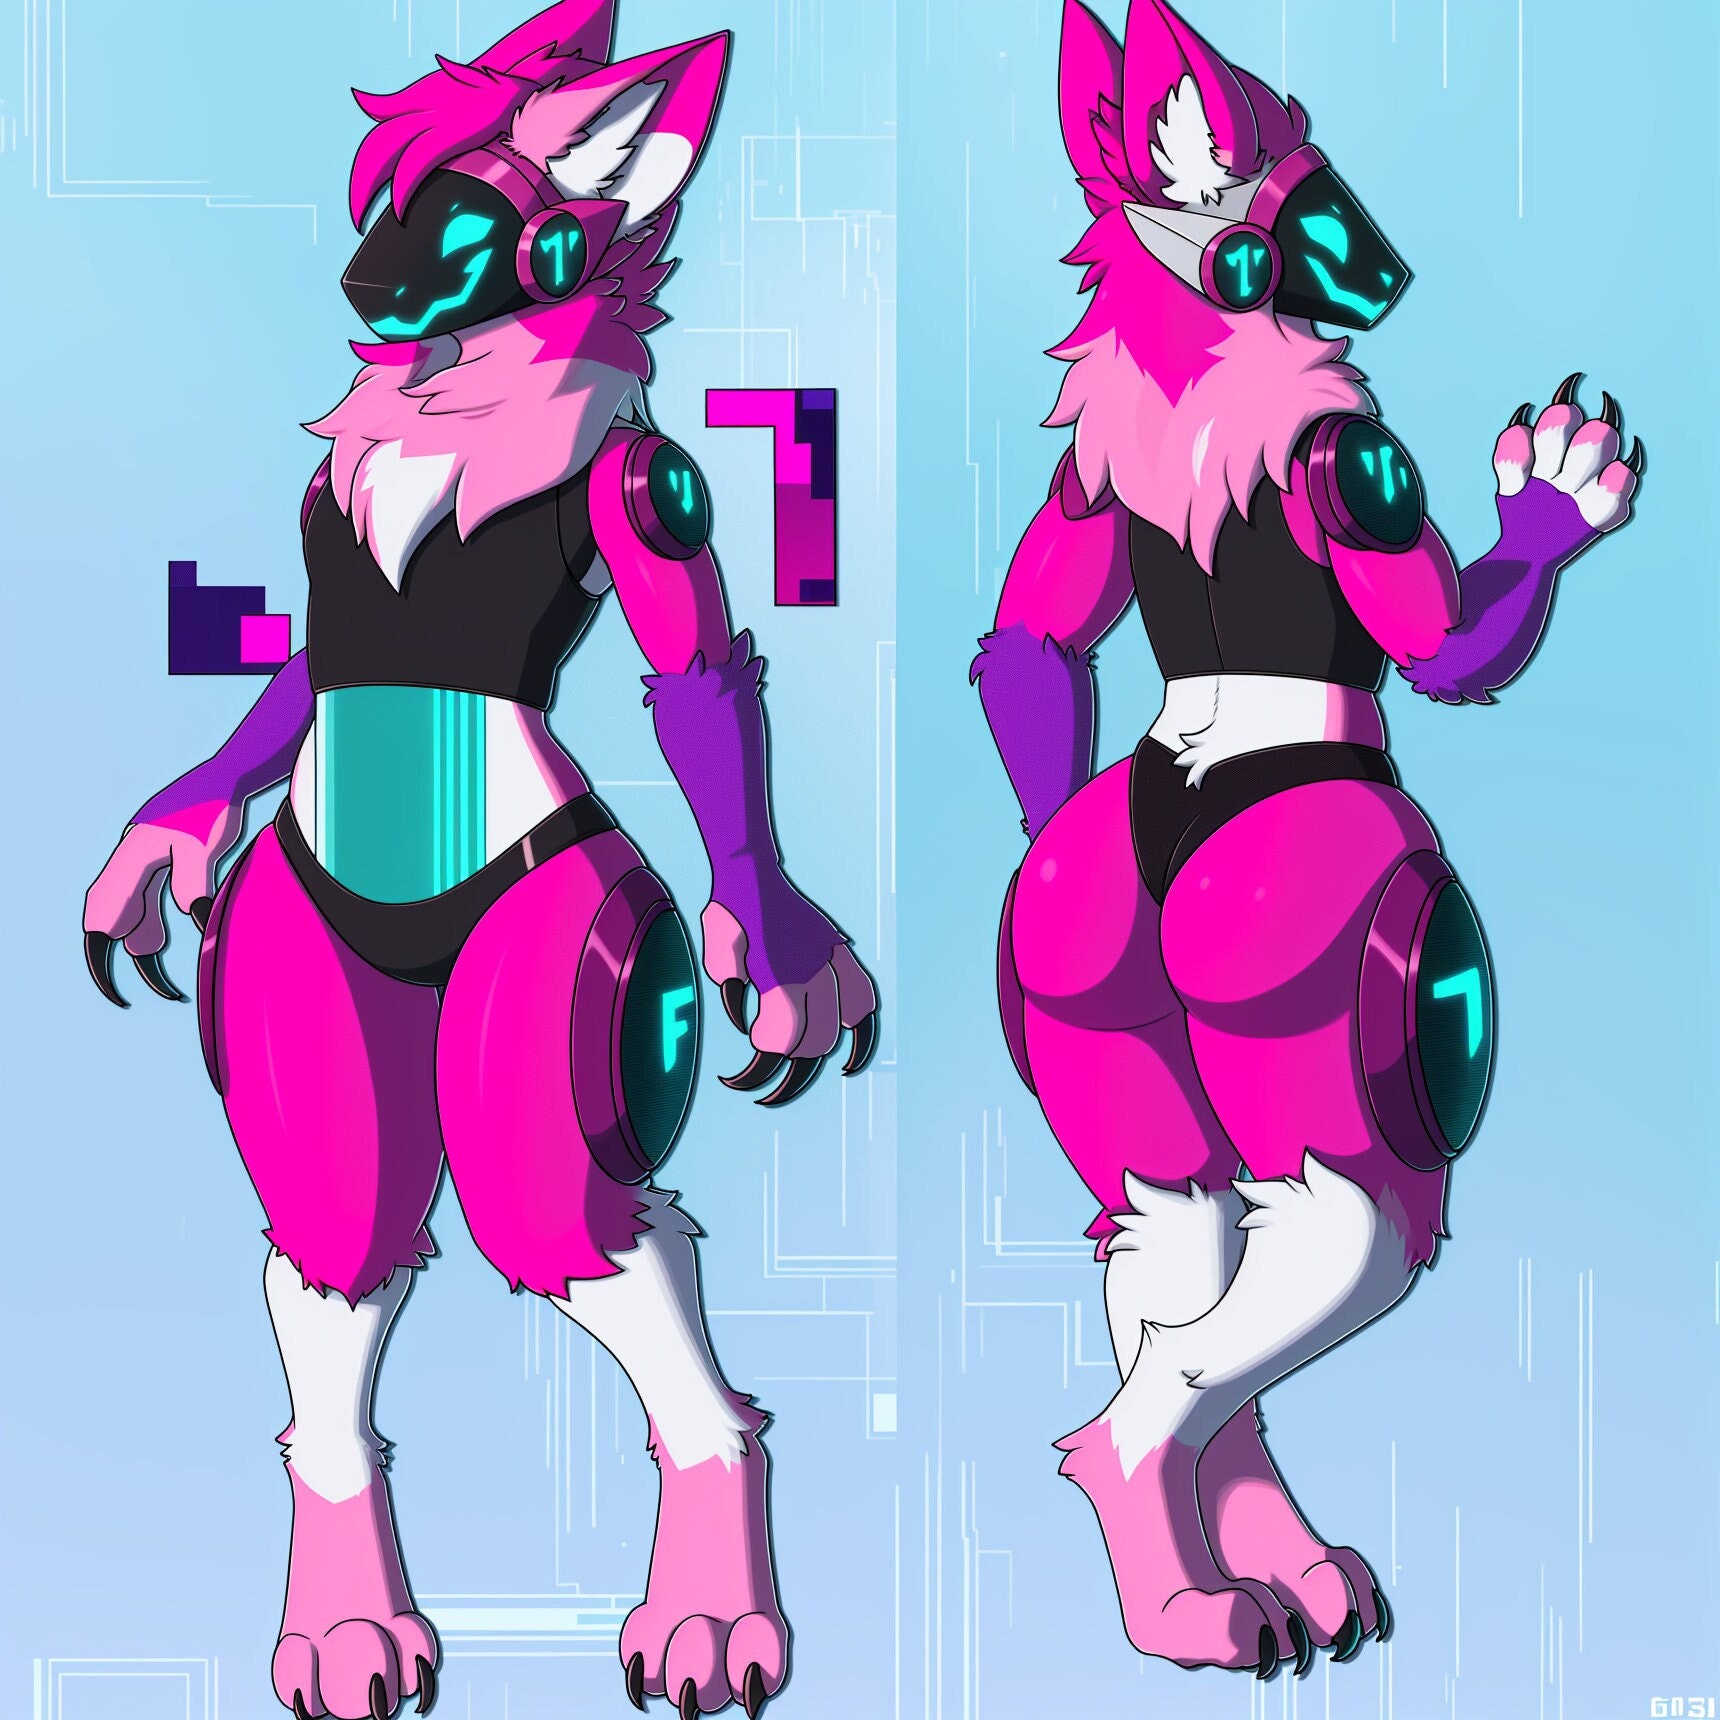 Protogen Fursona Adopt Limited Edition: Adoptable Collectable - Only 2 Will  Ever Be Sold, Limited Edition Protogen Furry Adoptable